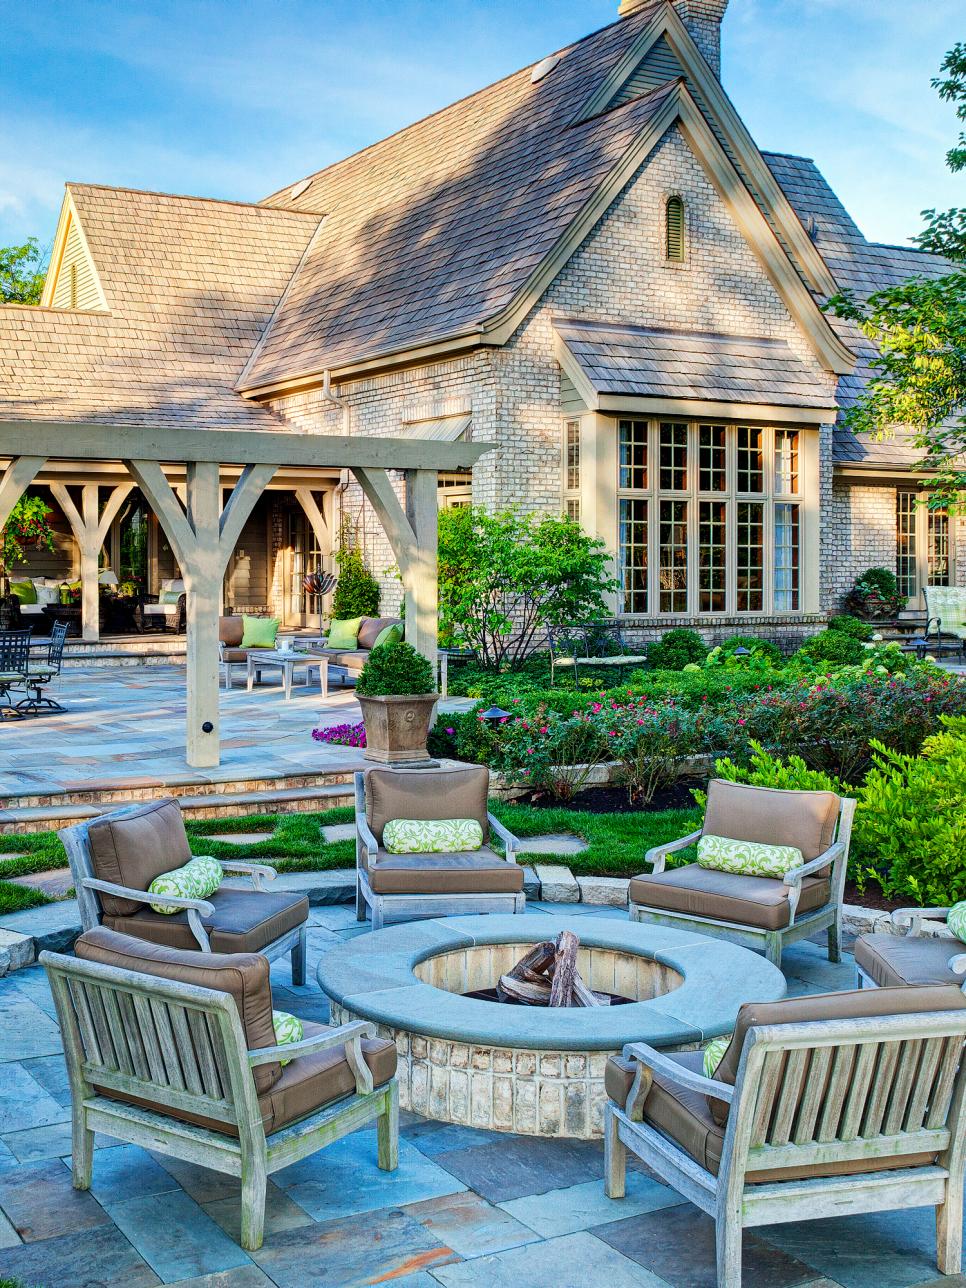 Exterior of Traditional Brick Home With Round Fire Pit, Wood Chairs